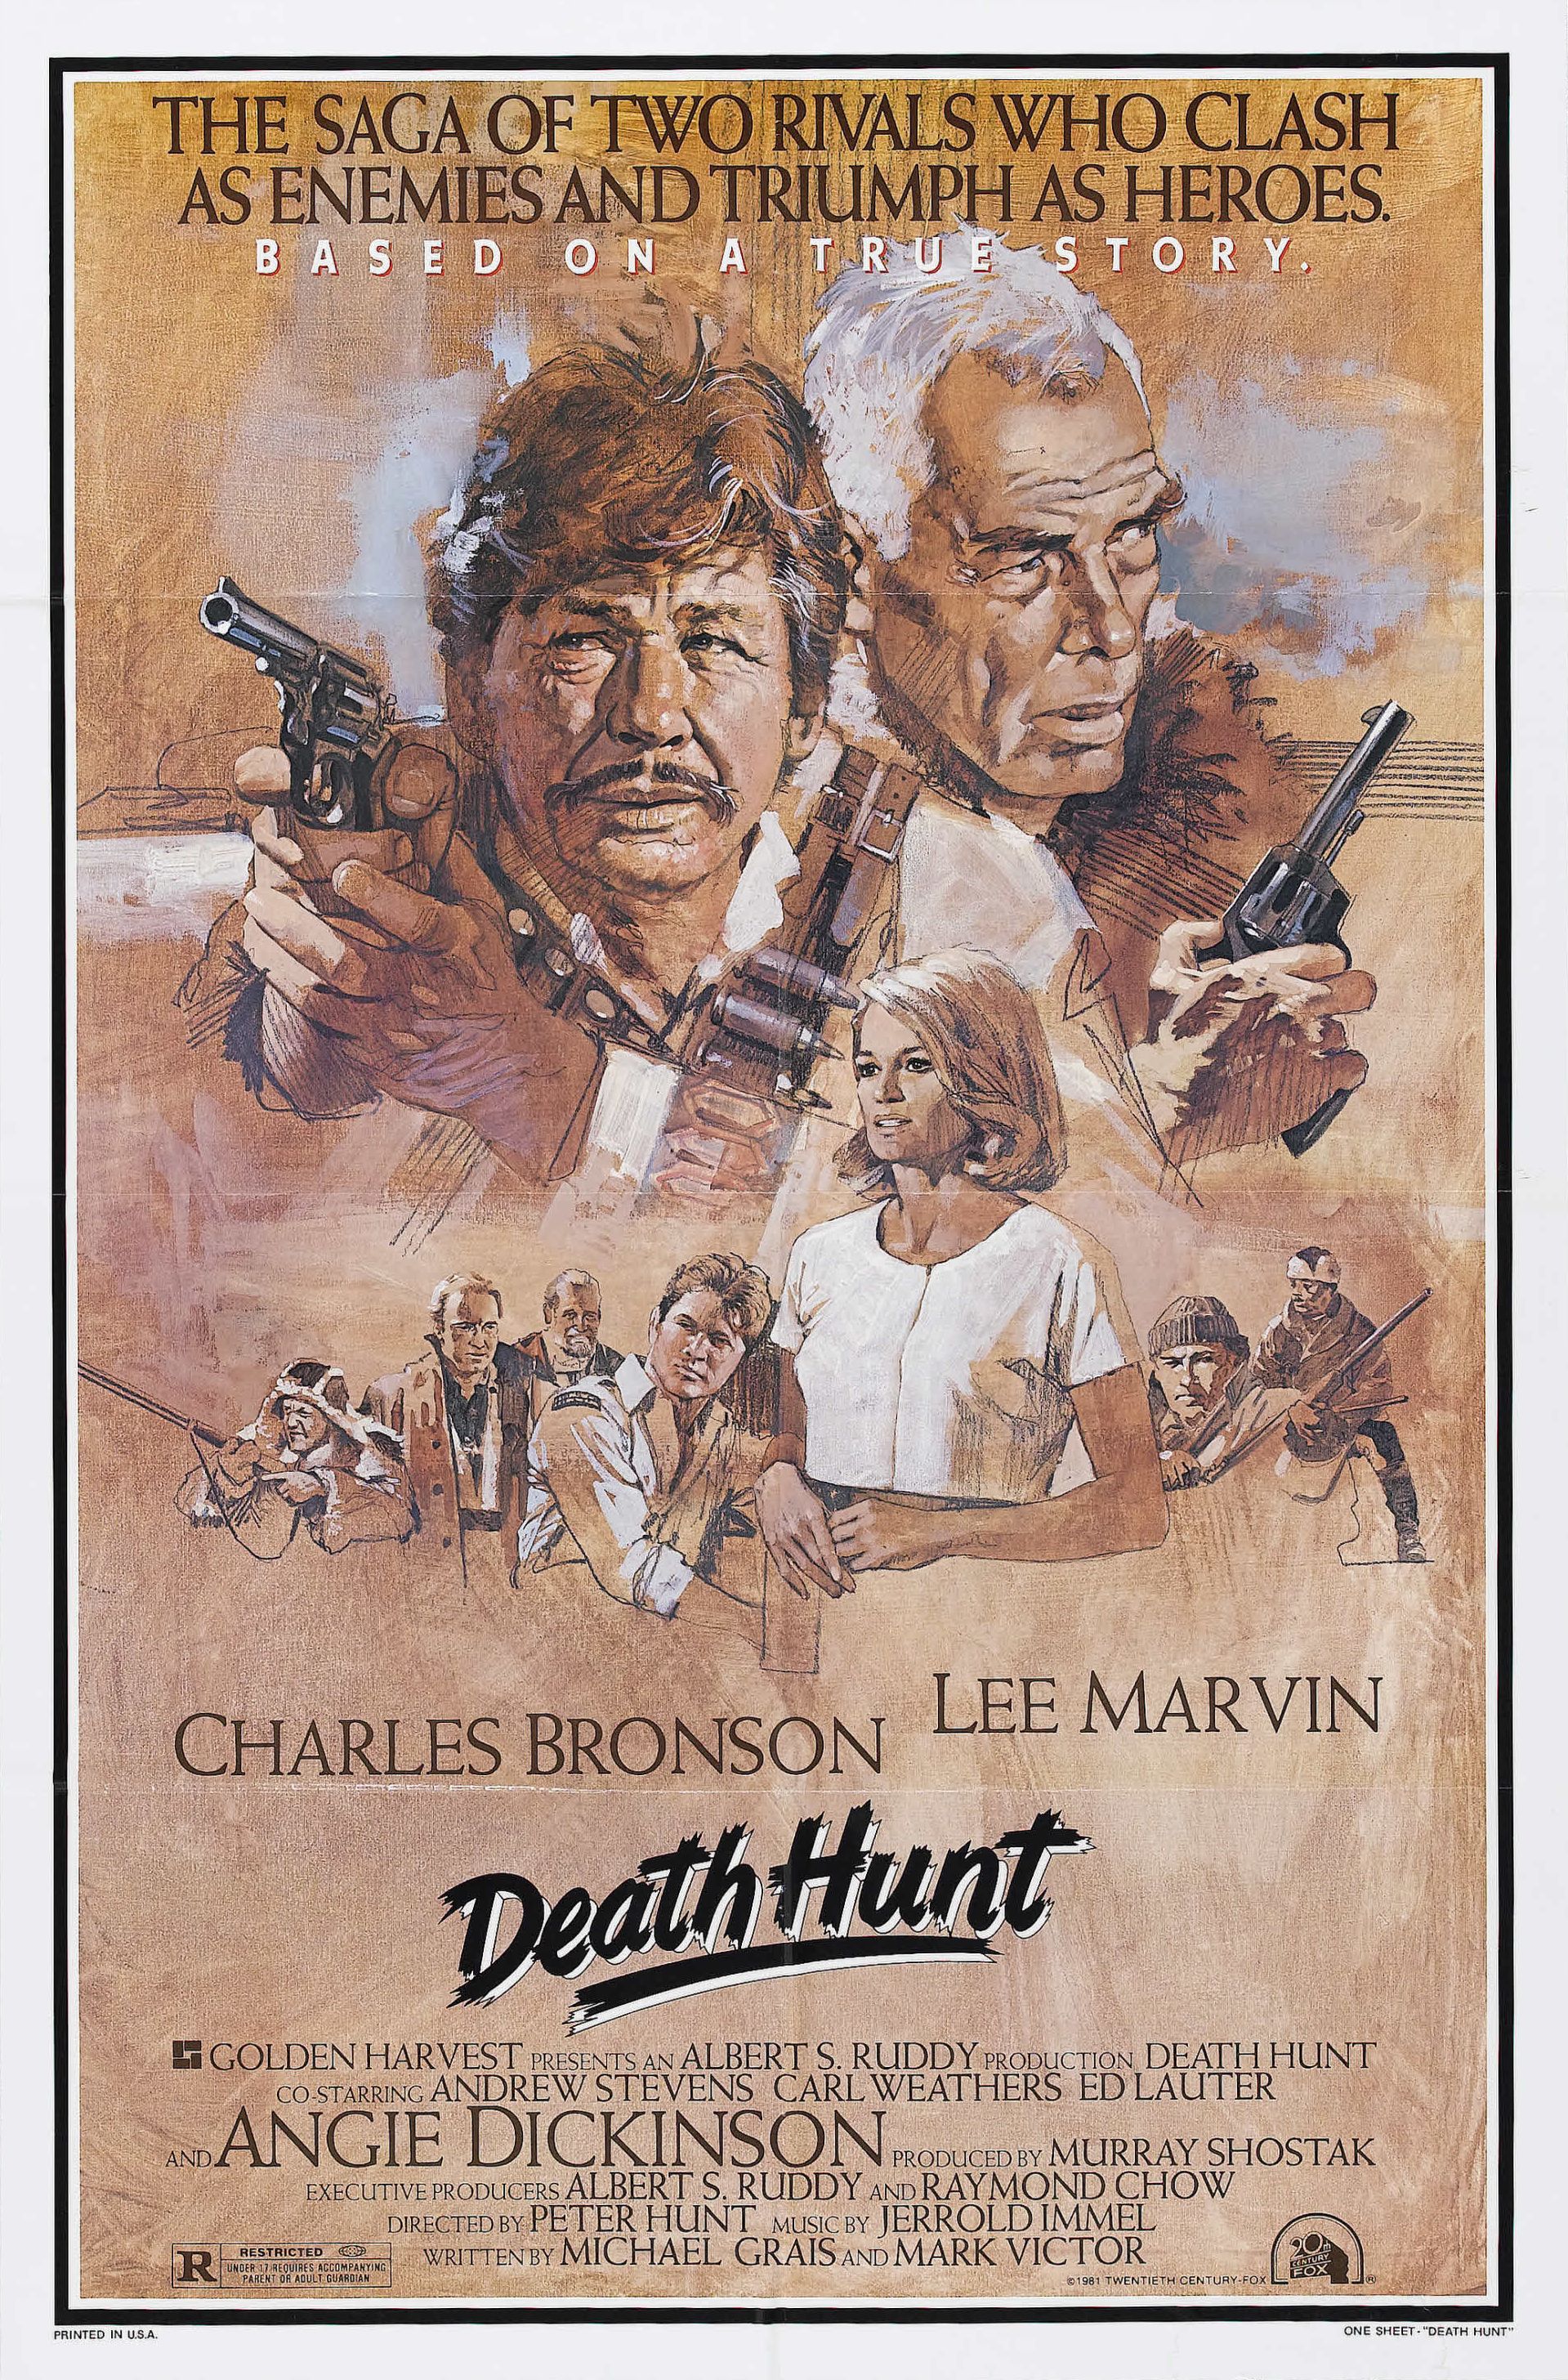 death hunt movie - The Saga Of Two Rivals Who Clash As Enemies And Triumph As Heroes Based On A Triestory. Charles Bronson Lee Marvin Death Hunt Colden Harvestadesiverths Eduter Angie Dickinson. Murray Shostak M A Tekt S Ruloy Raymond Chow Erhunderrocd In